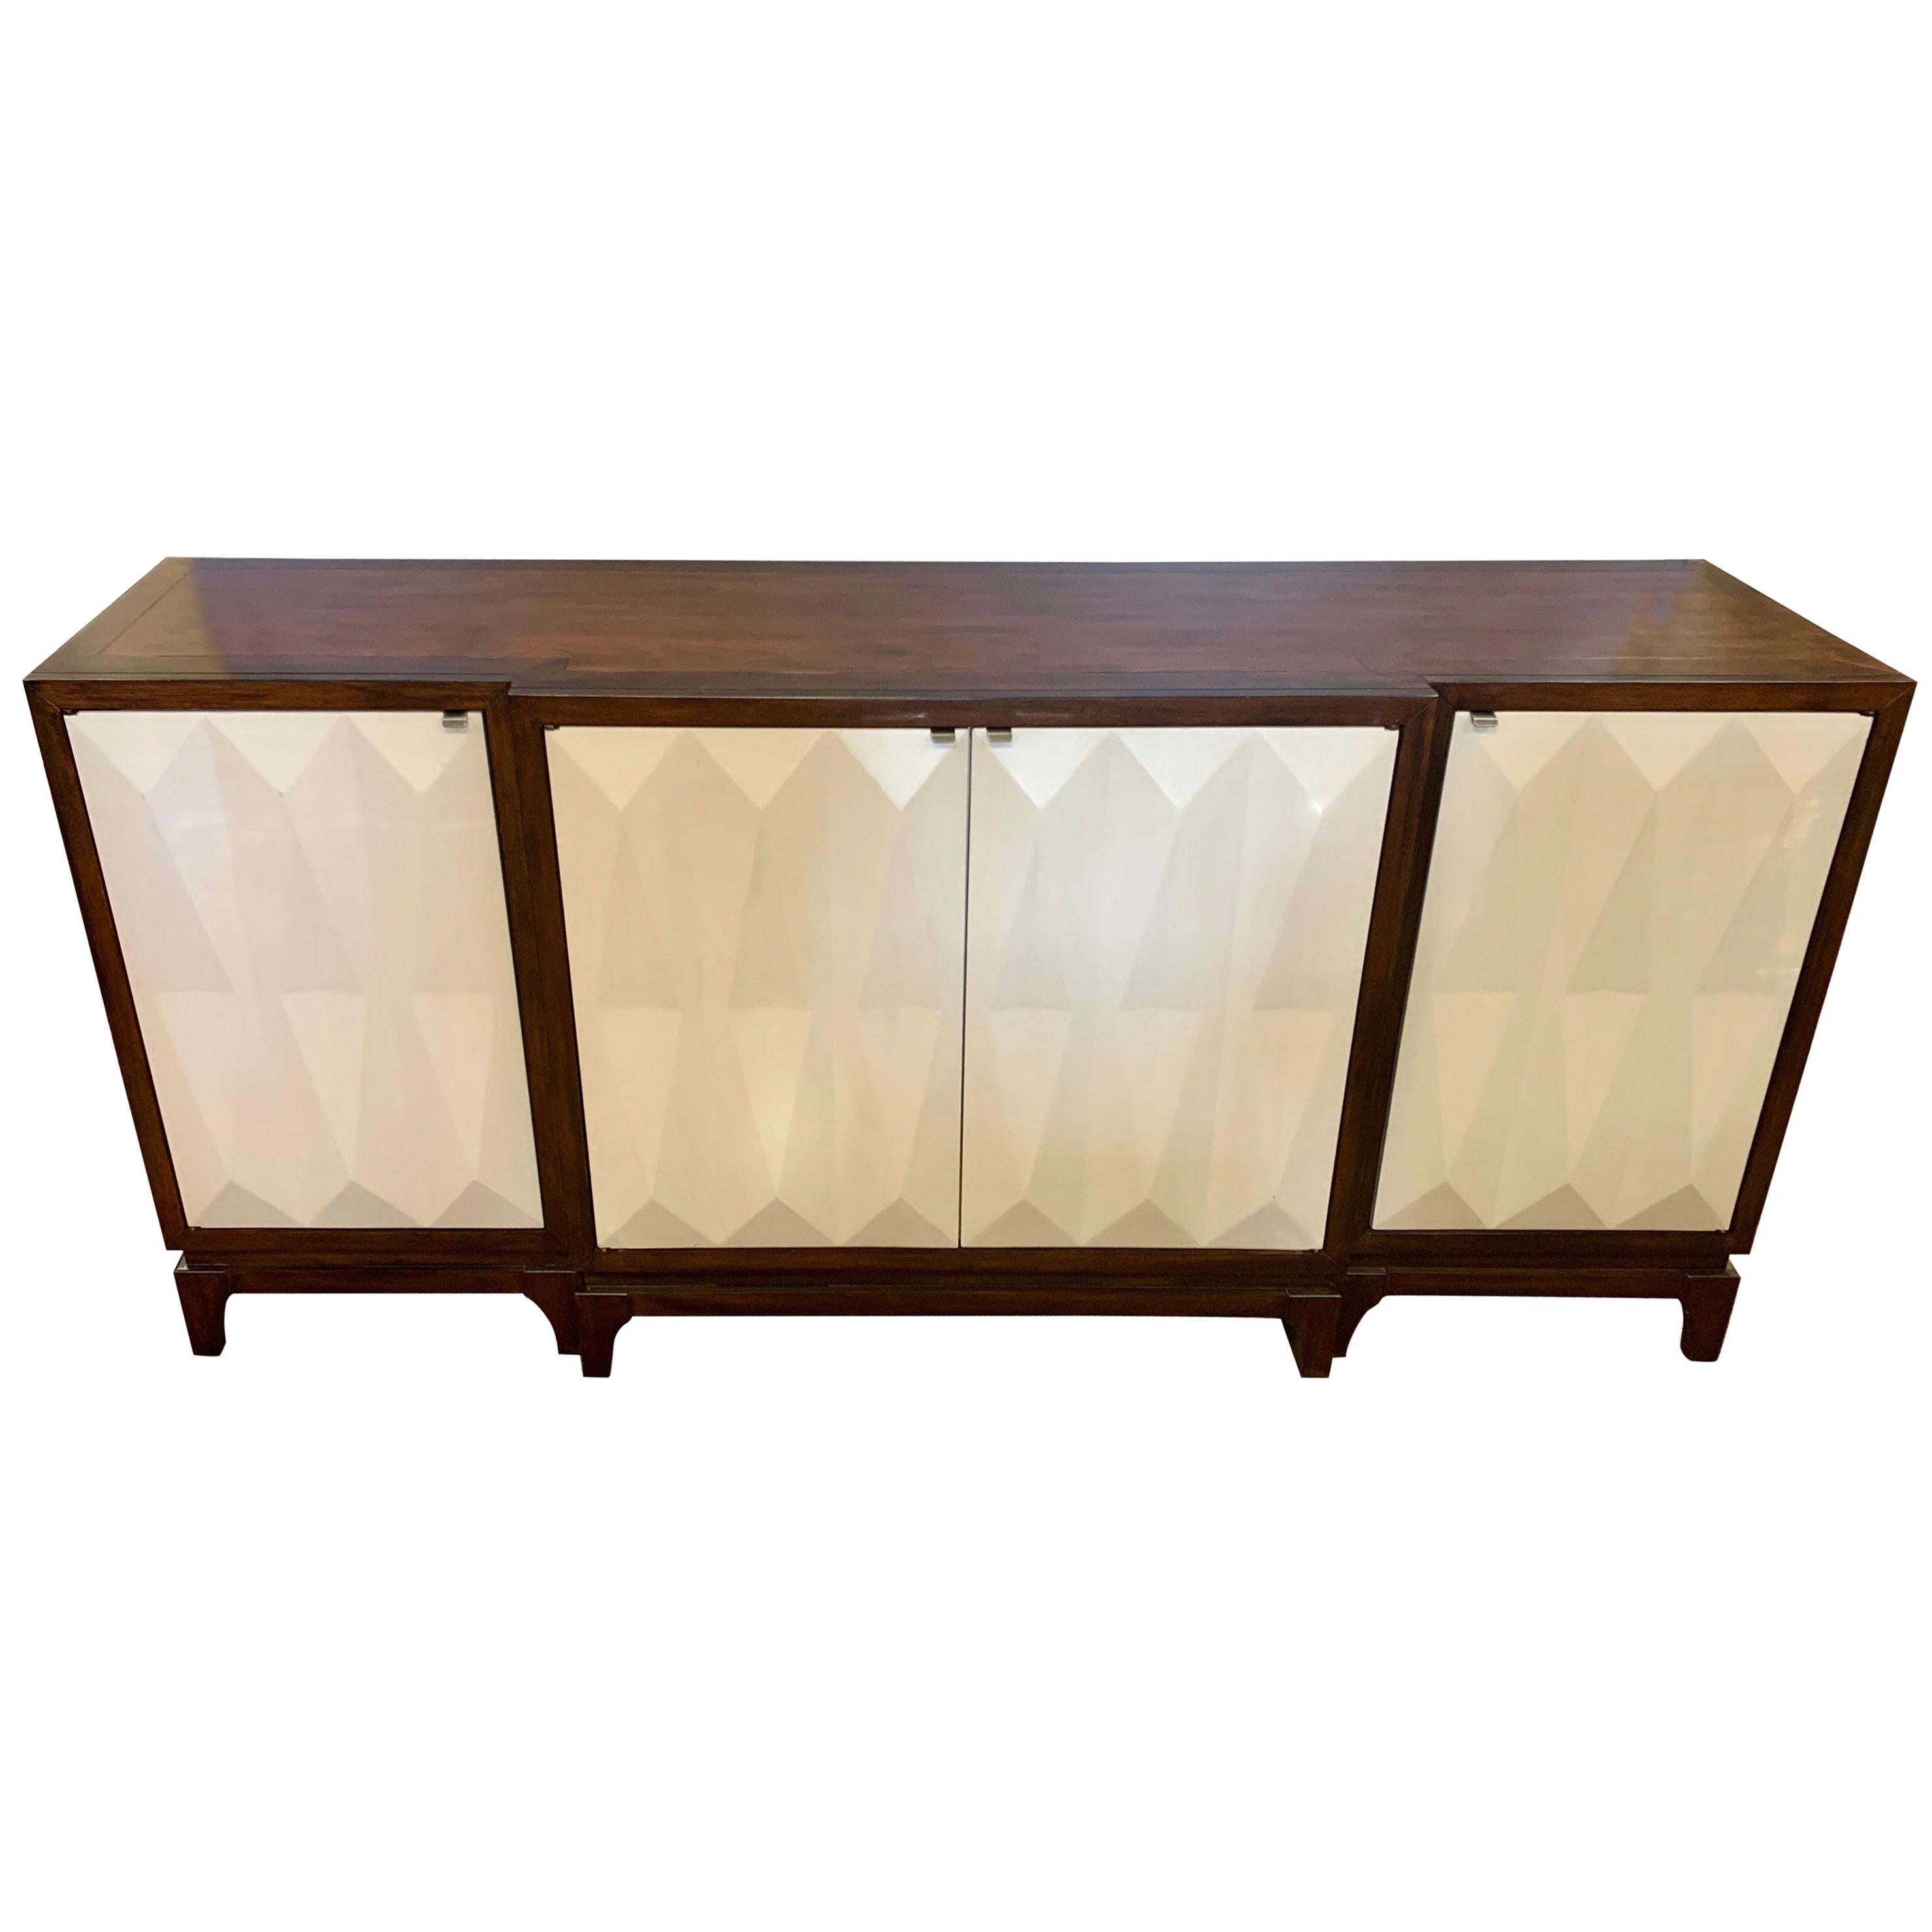 Contemporary Mahogany Server with Sculpted Doors Buffet Sideboard Credenza Bar